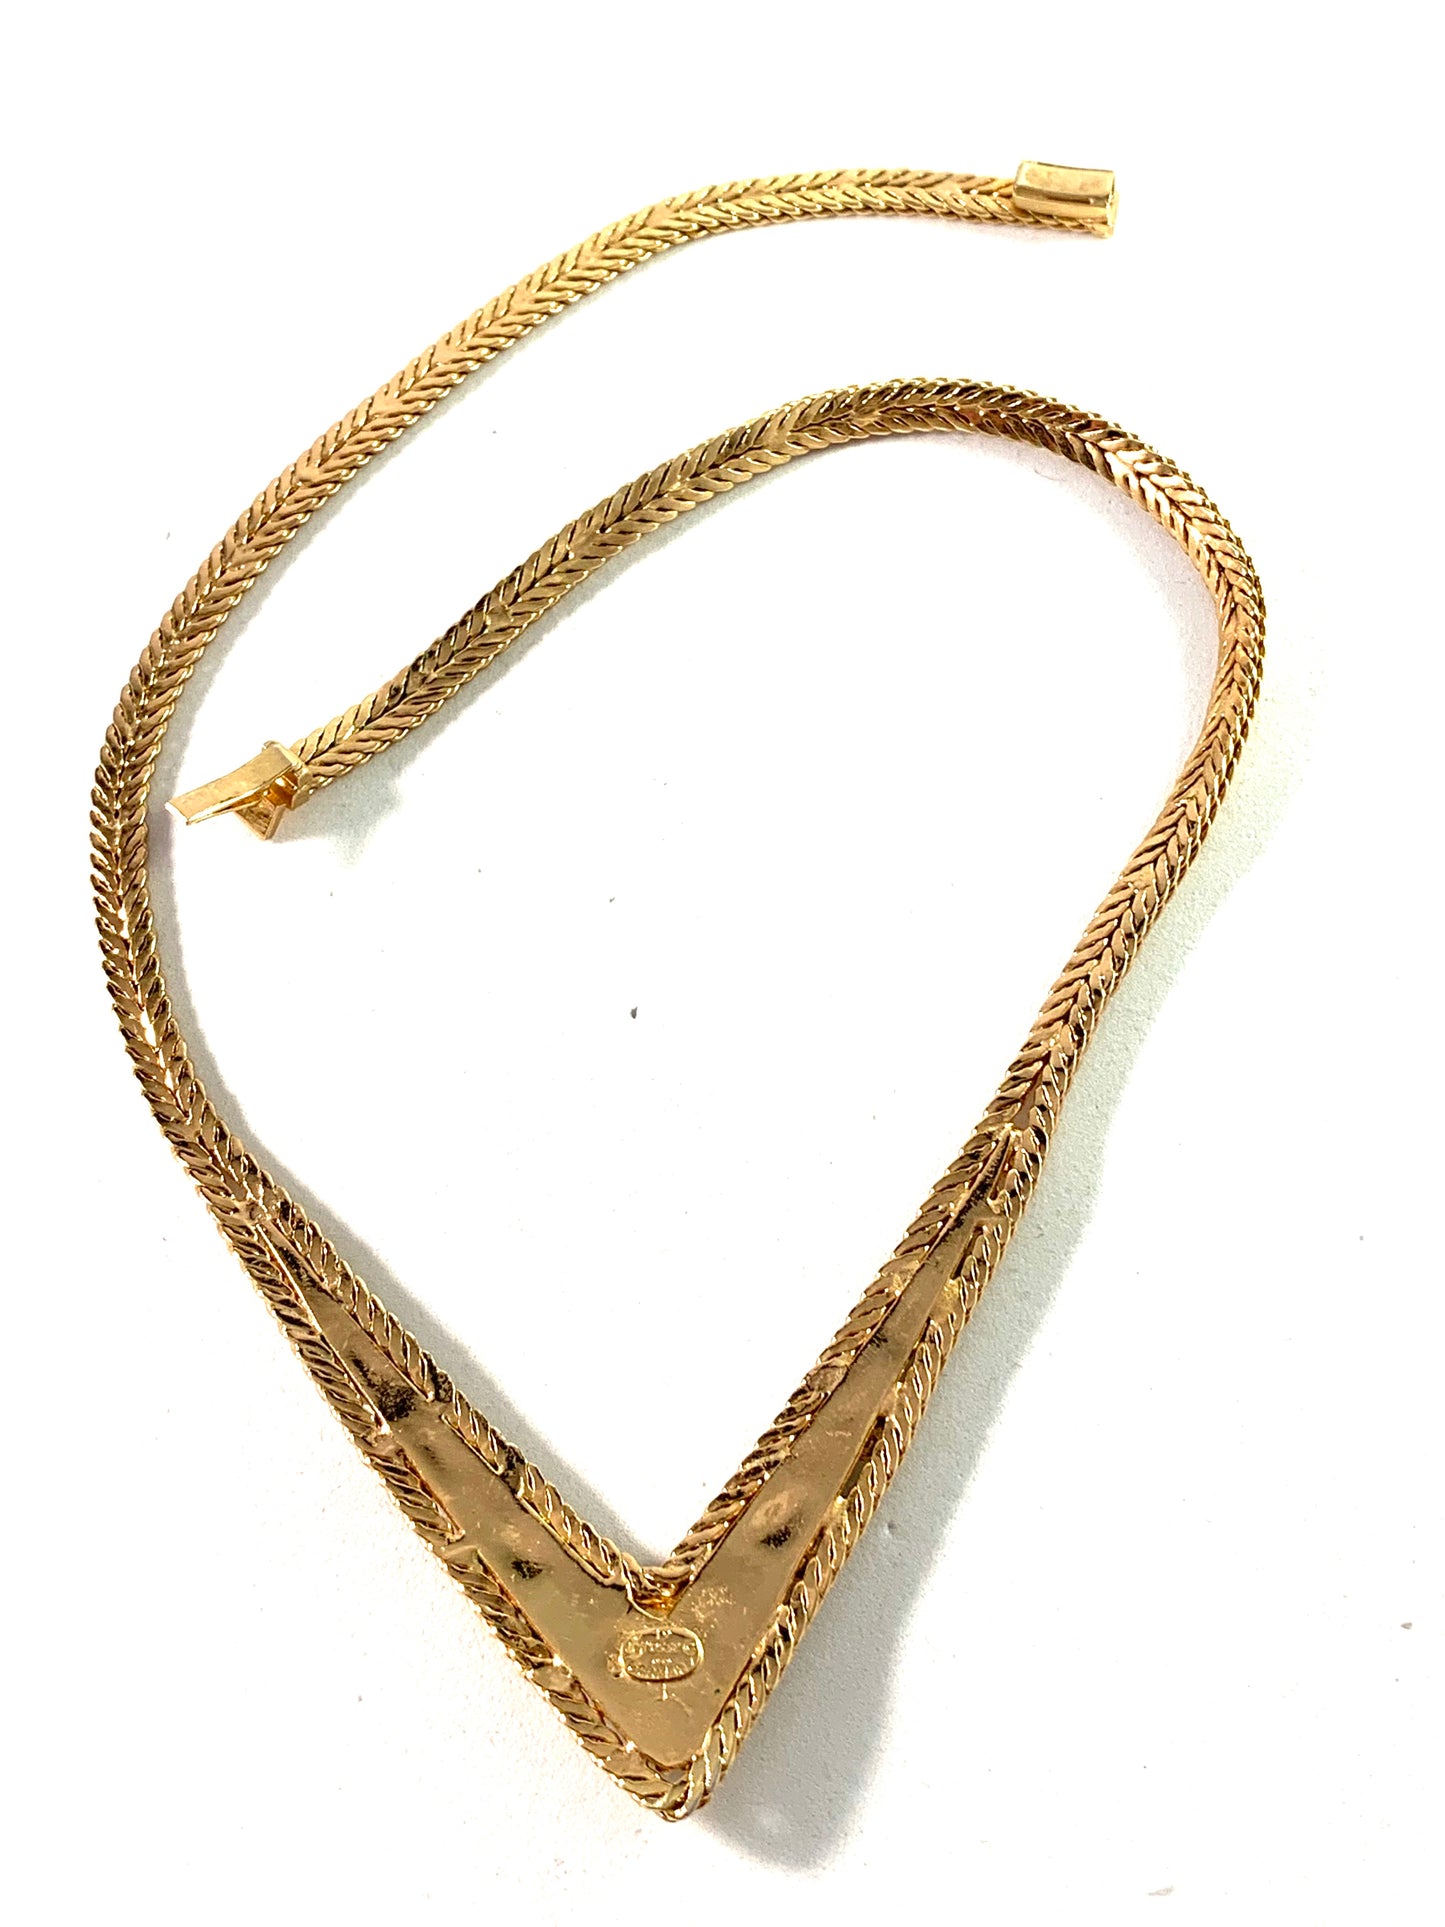 Henkel and Grosse, Germany 1966, Costume Jewelry Necklace.